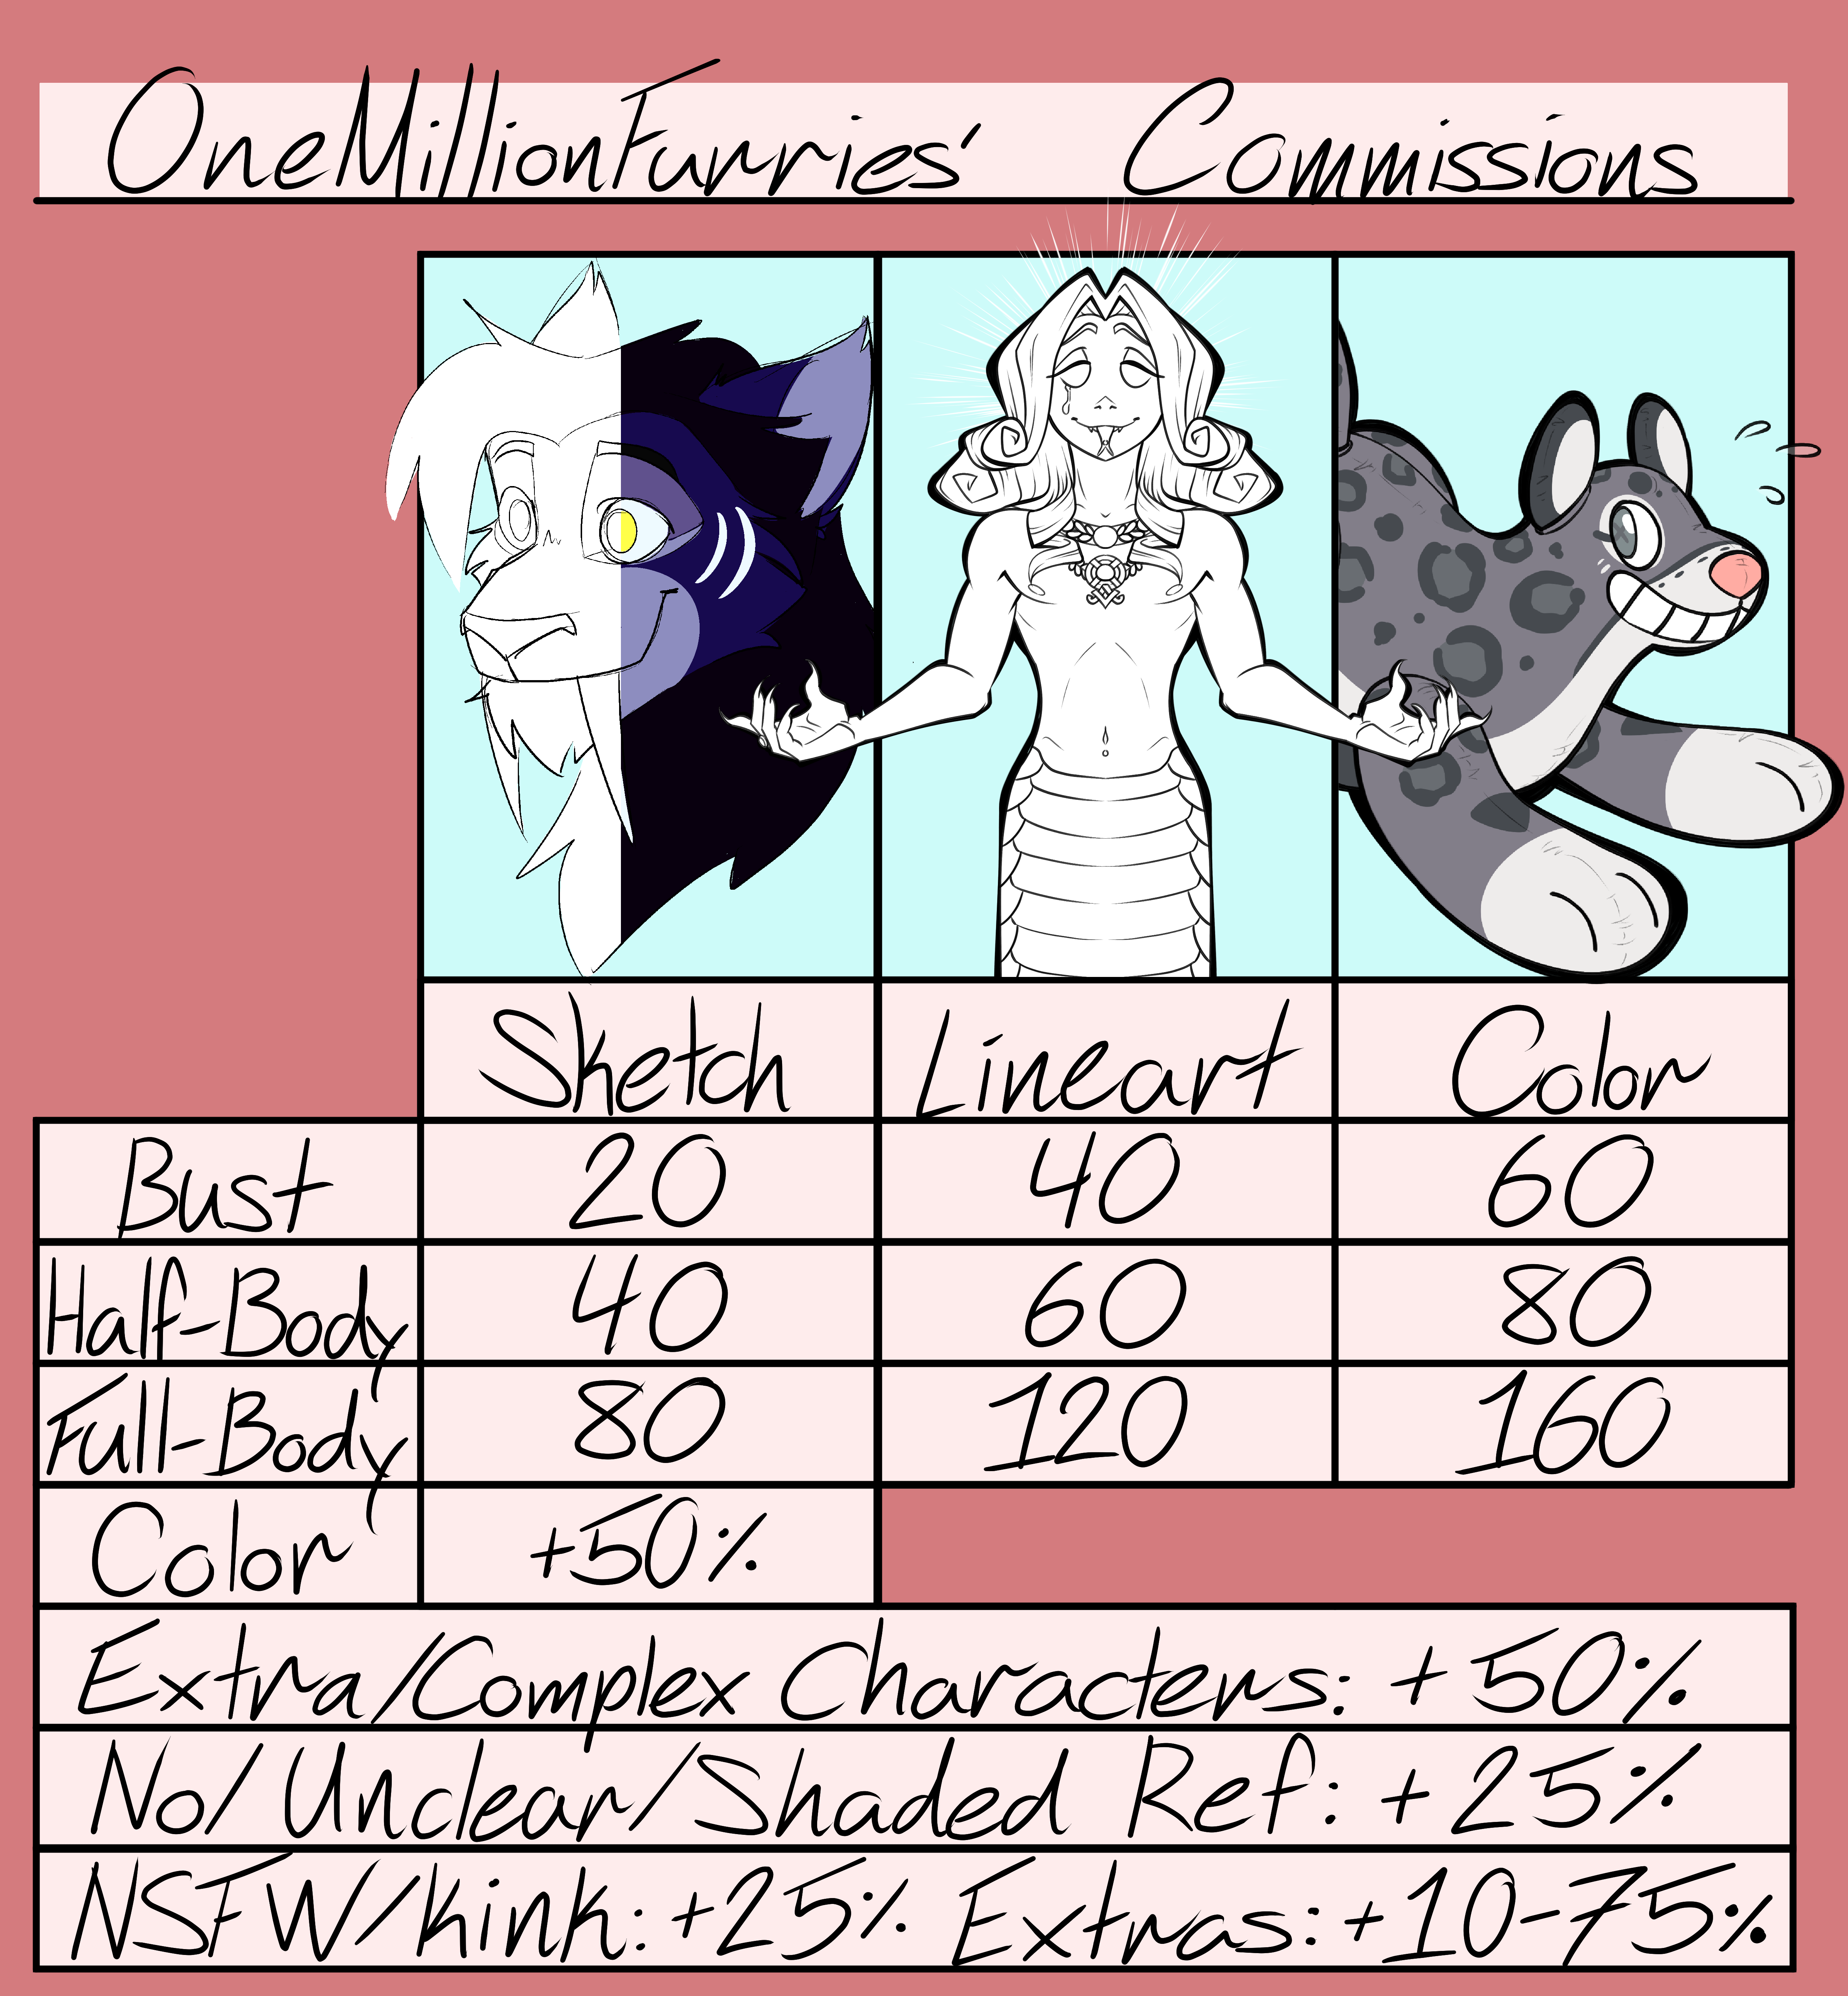 A commission price sheet for the webmaster. Base prices are as follows: 20 for a bust, 40 for a half-body, and 60 for a full-body. Base prices include a sketch, an additional 20 dollars adds an additional level of complexity; ie., an added 20 adds lineart, and an added 40 adds full color. For the sketch level, an additional 50% adds color. For additional or complex characters, 50% is added to the price, and for characters without clear references, 25% is added. 25% is added for NSFW/kink, and anywhere from 10-75% is added for extras.